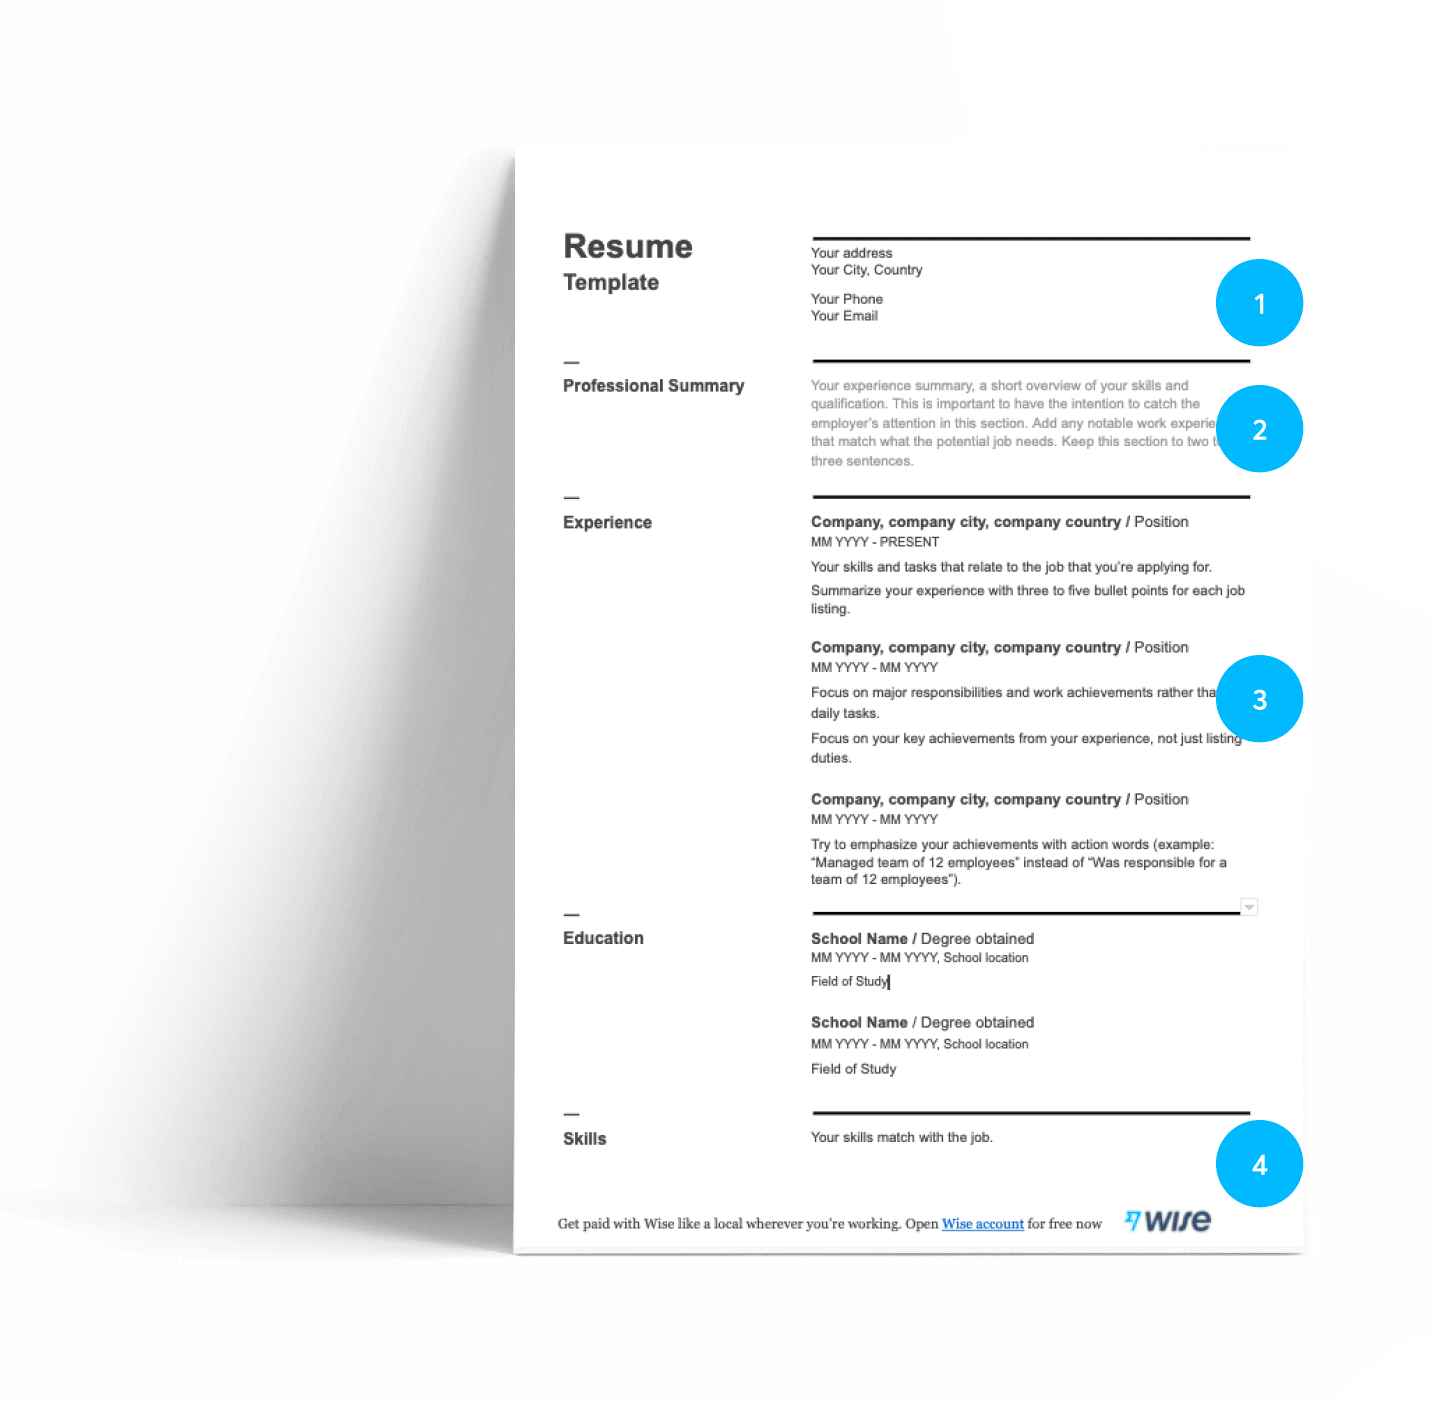 How to write a an accounting resume?